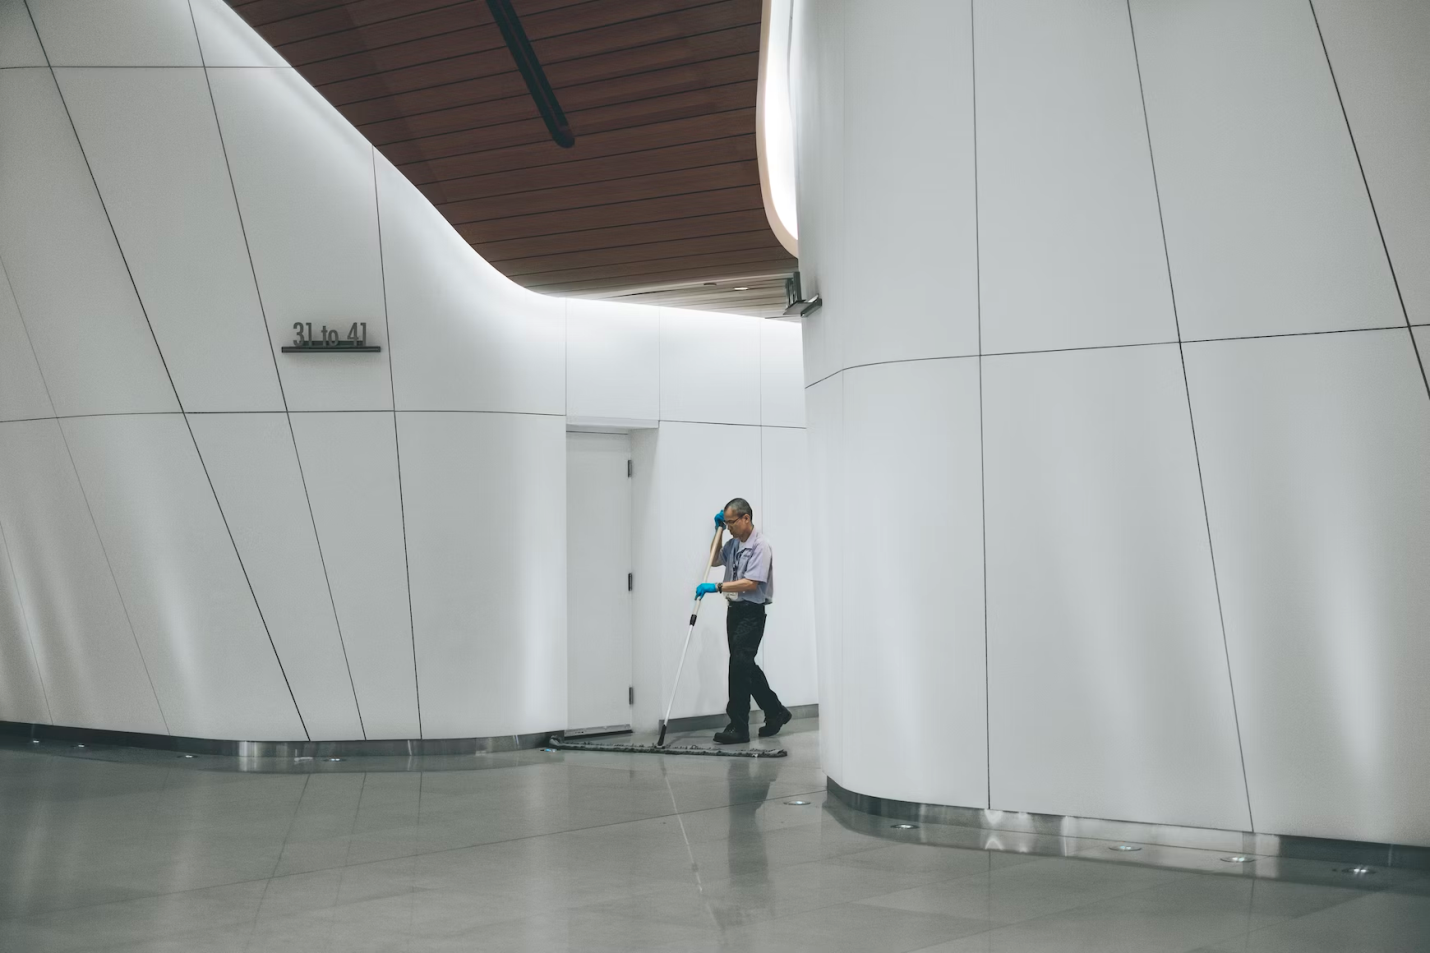 A janitorial staff member works in a commercial building.